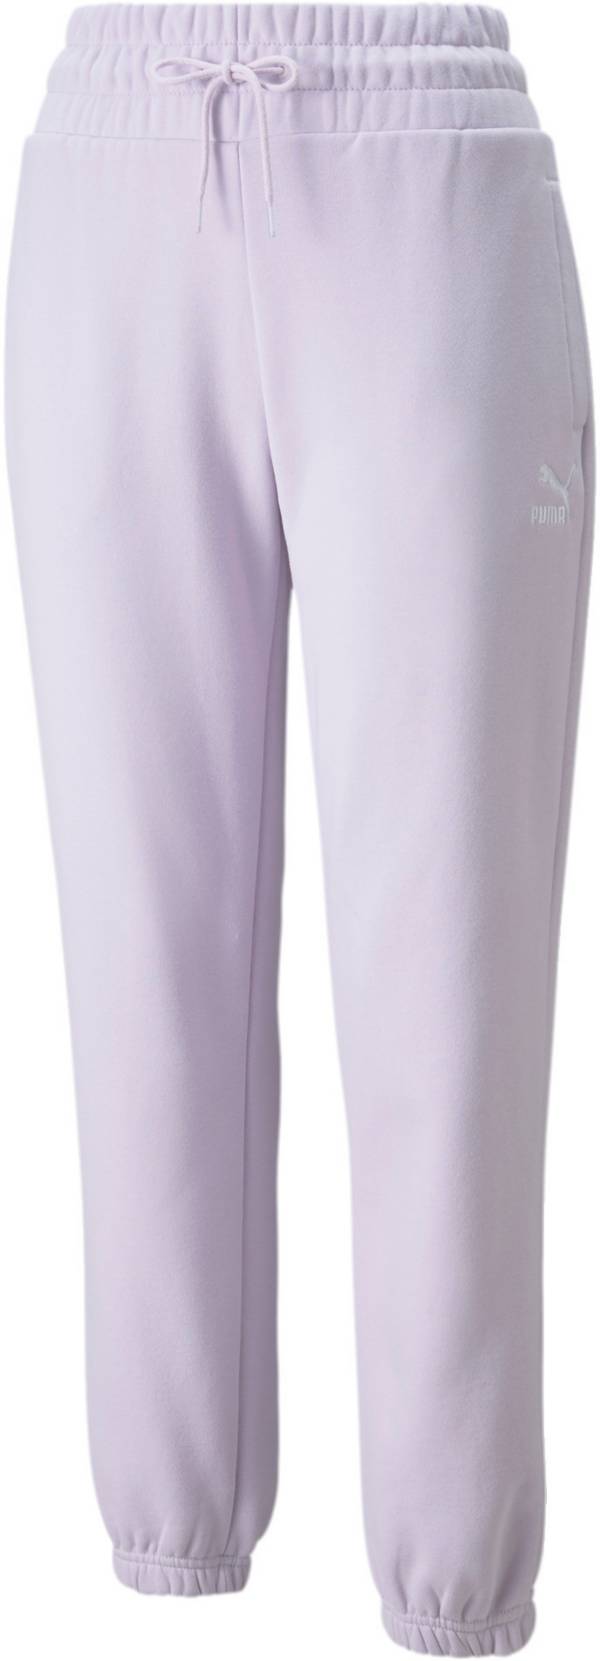 PUMA Women's Classics Relaxed Pants | Dick's Sporting Goods